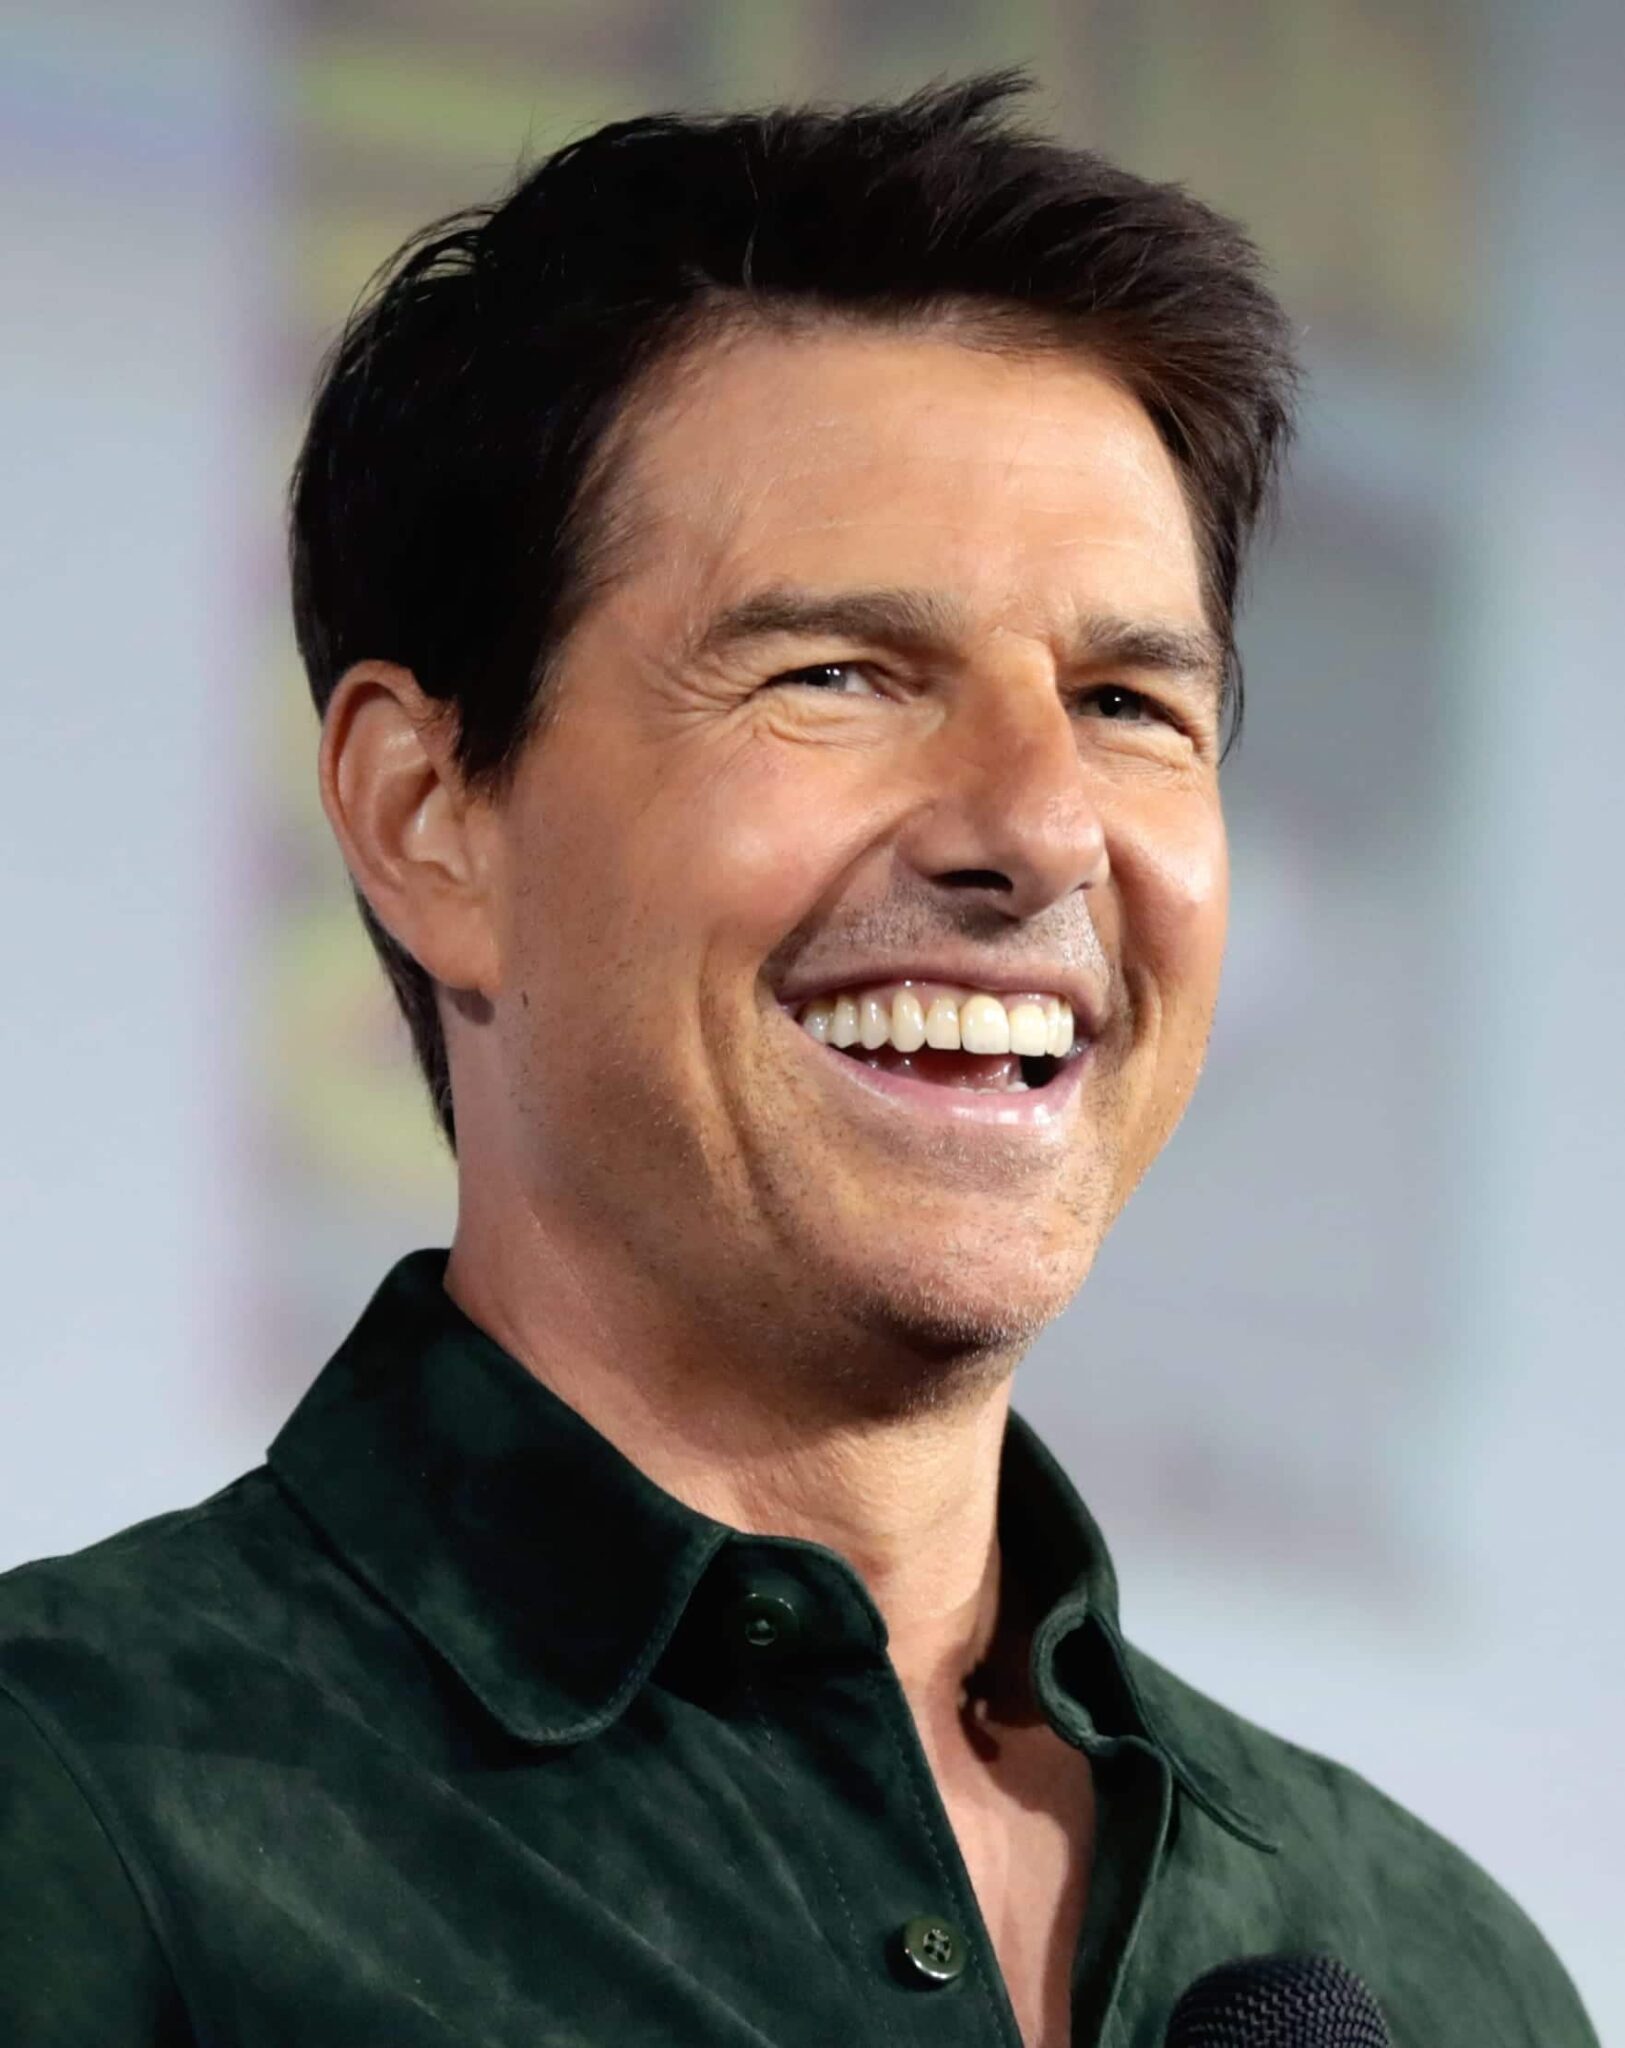 how old is tom cruise and when is his birthday